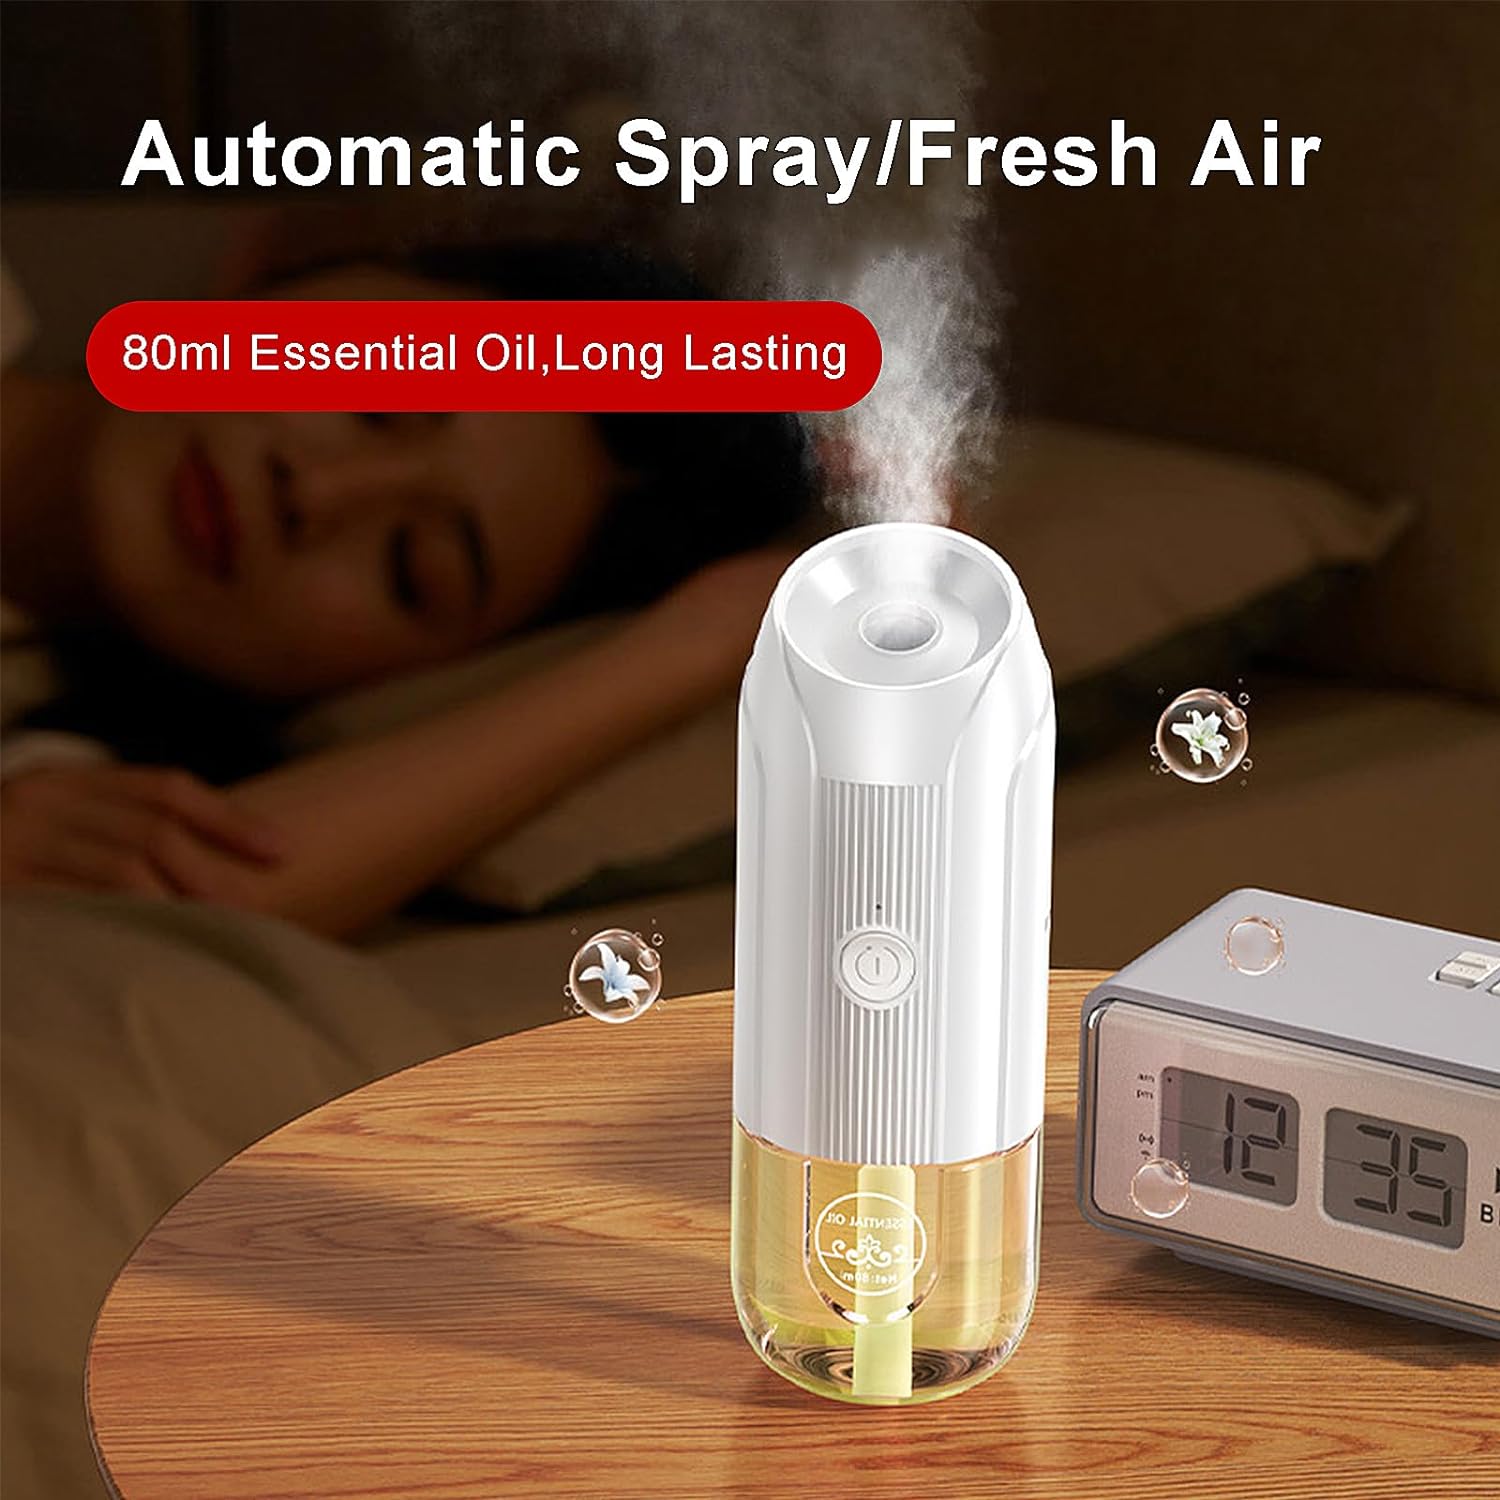 Mini Essential Oil Diffuser, Ultrasonic Mist Air Fresheners for Home with 80 ml Shangri-La Essential Oils,Wireless Scent Diffuser,3 Adjustable Aroma Mode, Automatic Spray Lasts Up to 35 Days